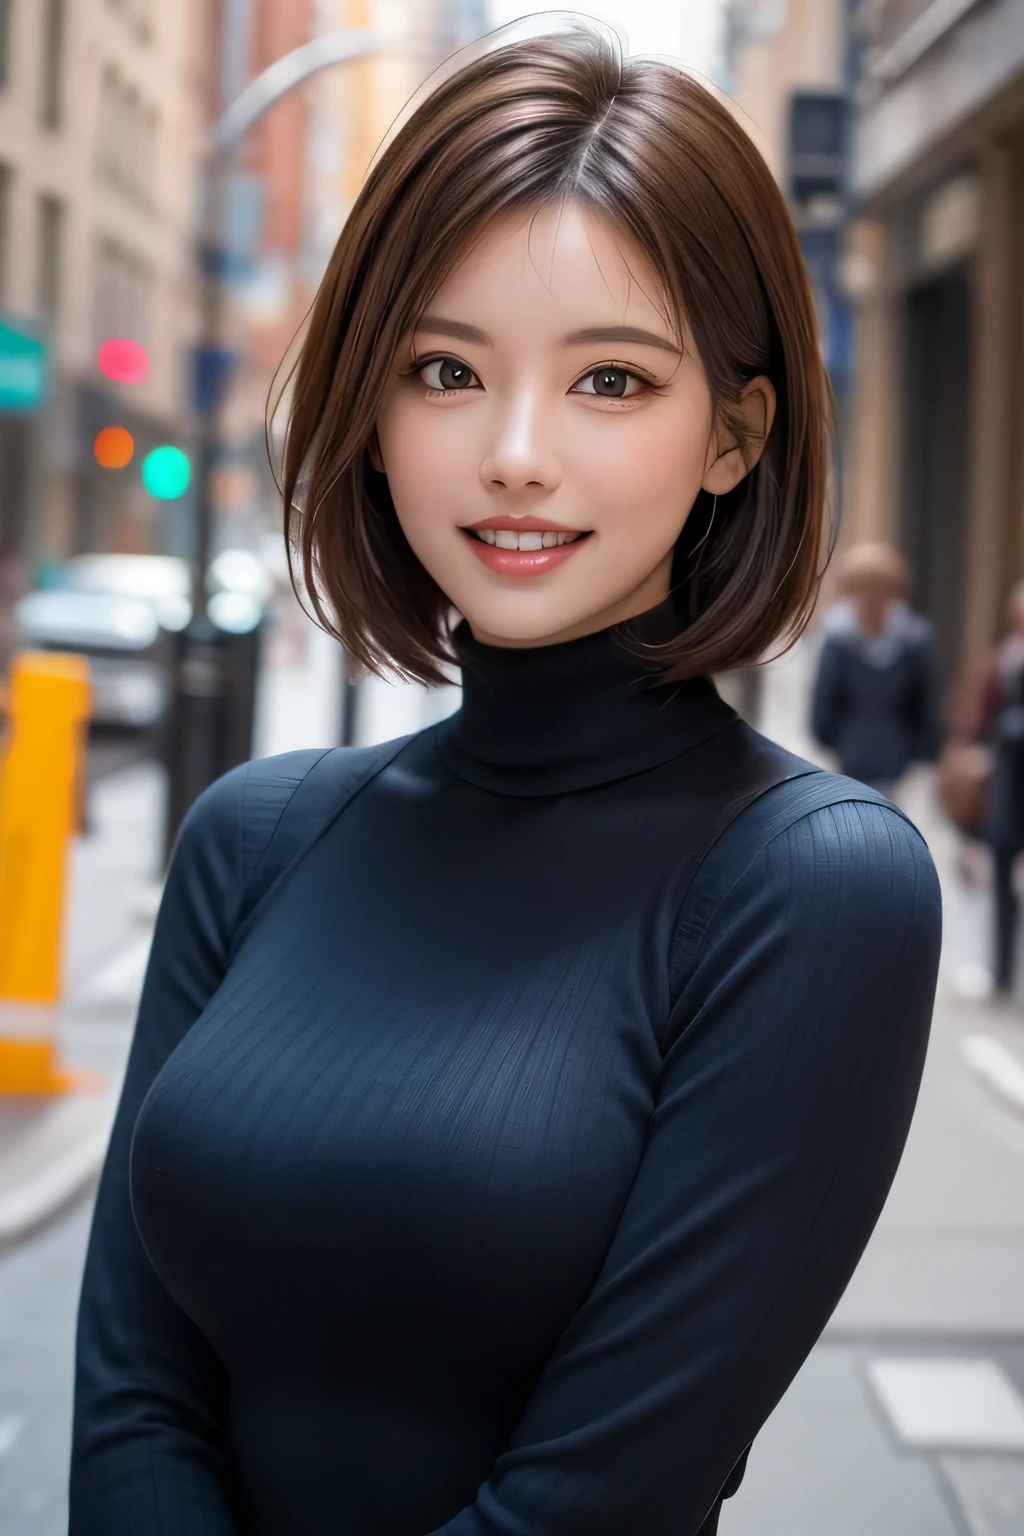 ((masterpiece)), ((Highest quality)), ((Complex)), ((Surreal)), (Realistic), (Mature Woman), ((No classes)), Very detailed, (1 female), Beautiful and detailed, (Beautiful Teeth), Grin, Brunette Bob Hair, Brown eyes, (Blue long turtleneck), (Upper Body), (background: underground), detailed background, Perfect Eyes, Captivating eyes, Looking at the audience, from before